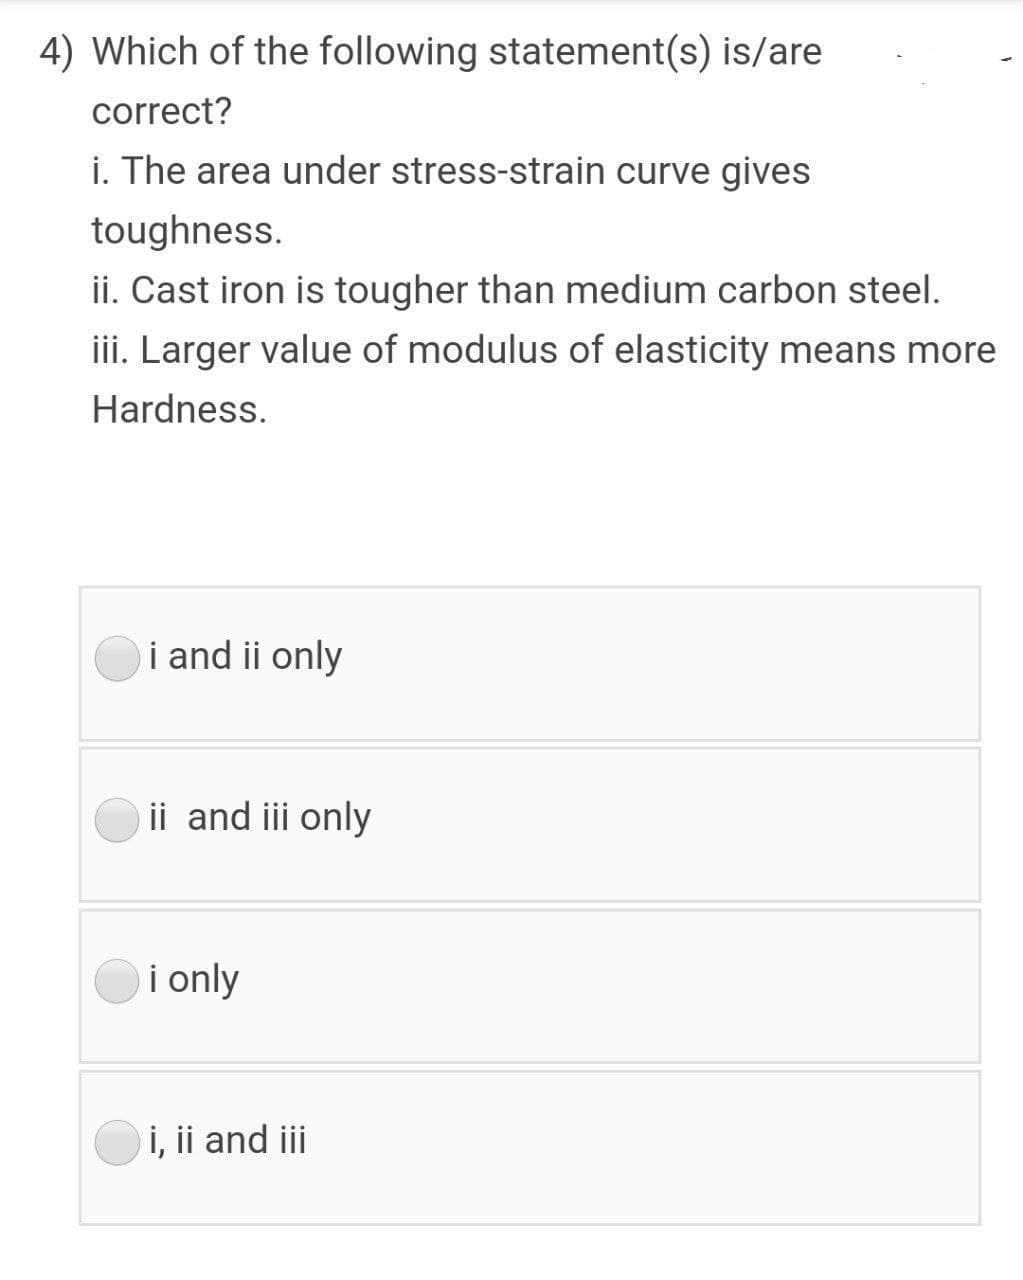 4) Which of the following statement(s) is/are
correct?
i. The area under stress-strain curve gives
toughness.
ii. Cast iron is tougher than medium carbon steel.
iii. Larger value of modulus of elasticity means more
Hardness.
i and ii only
ii and iii only
i only
i, ii and iii
